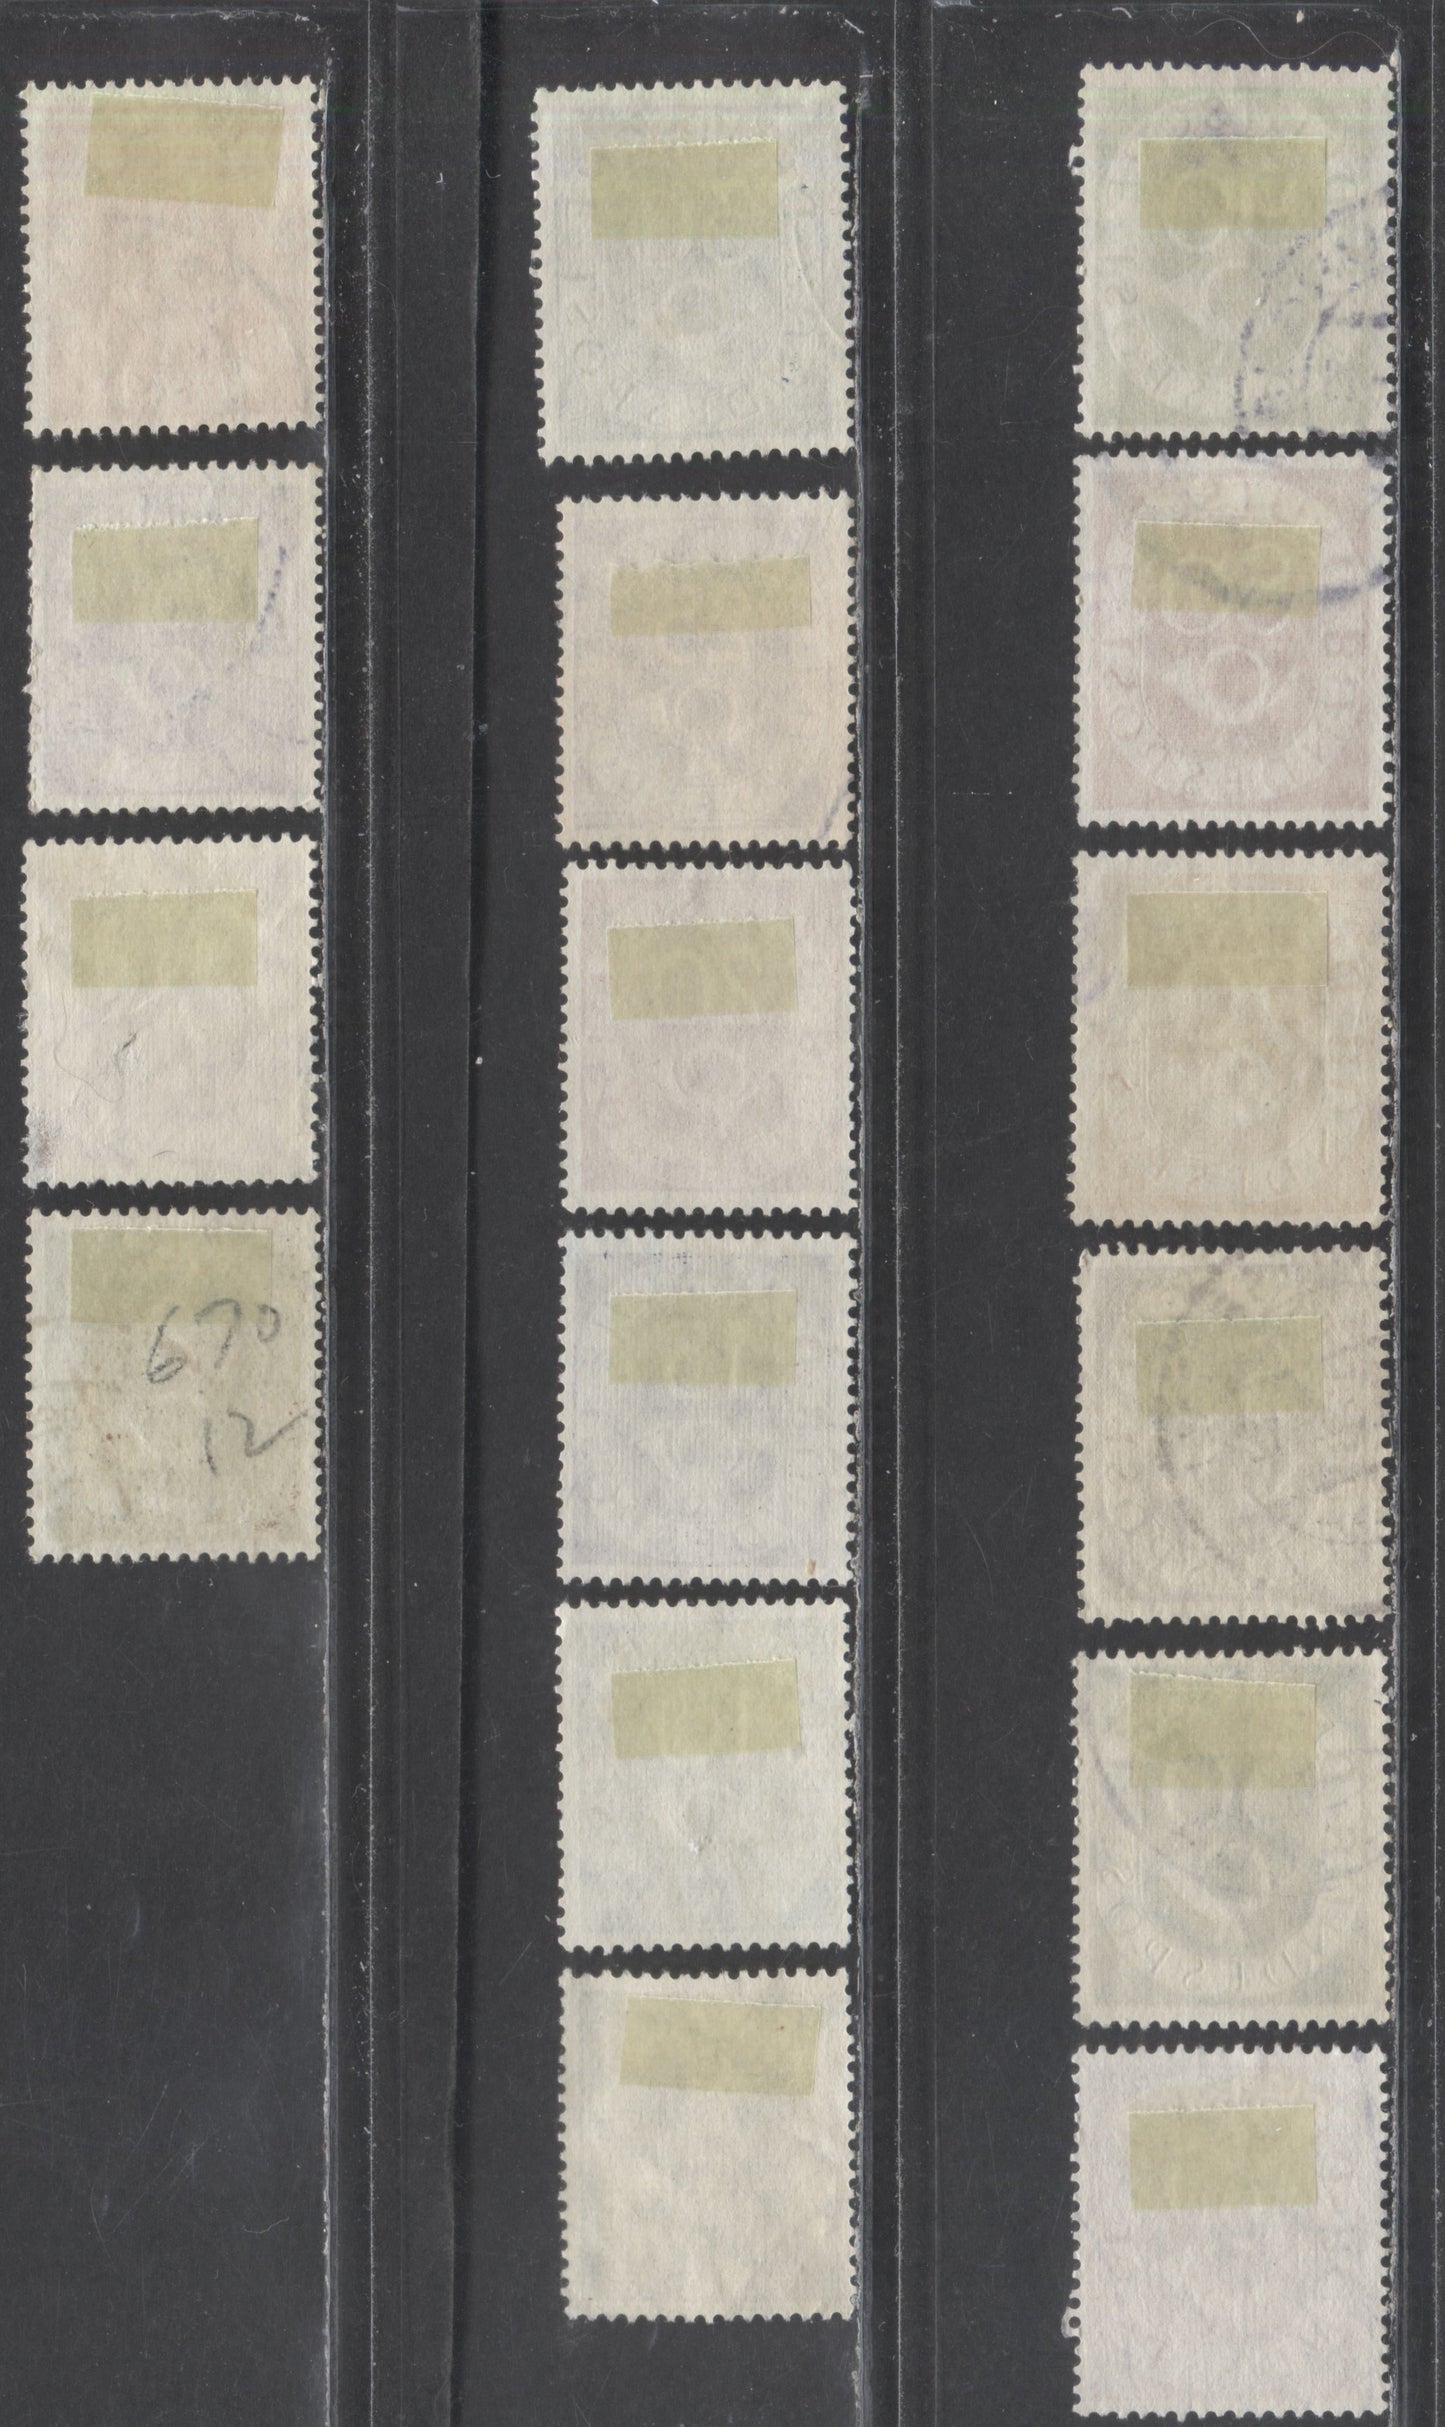 Lot 116 Germany SC#670-685 1951-1952 Posthorn Definitives, 16 Fine/Very Fine Used Singles, Click on Listing to See ALL Pictures, 2017 Scott Cat. $40.9 USD